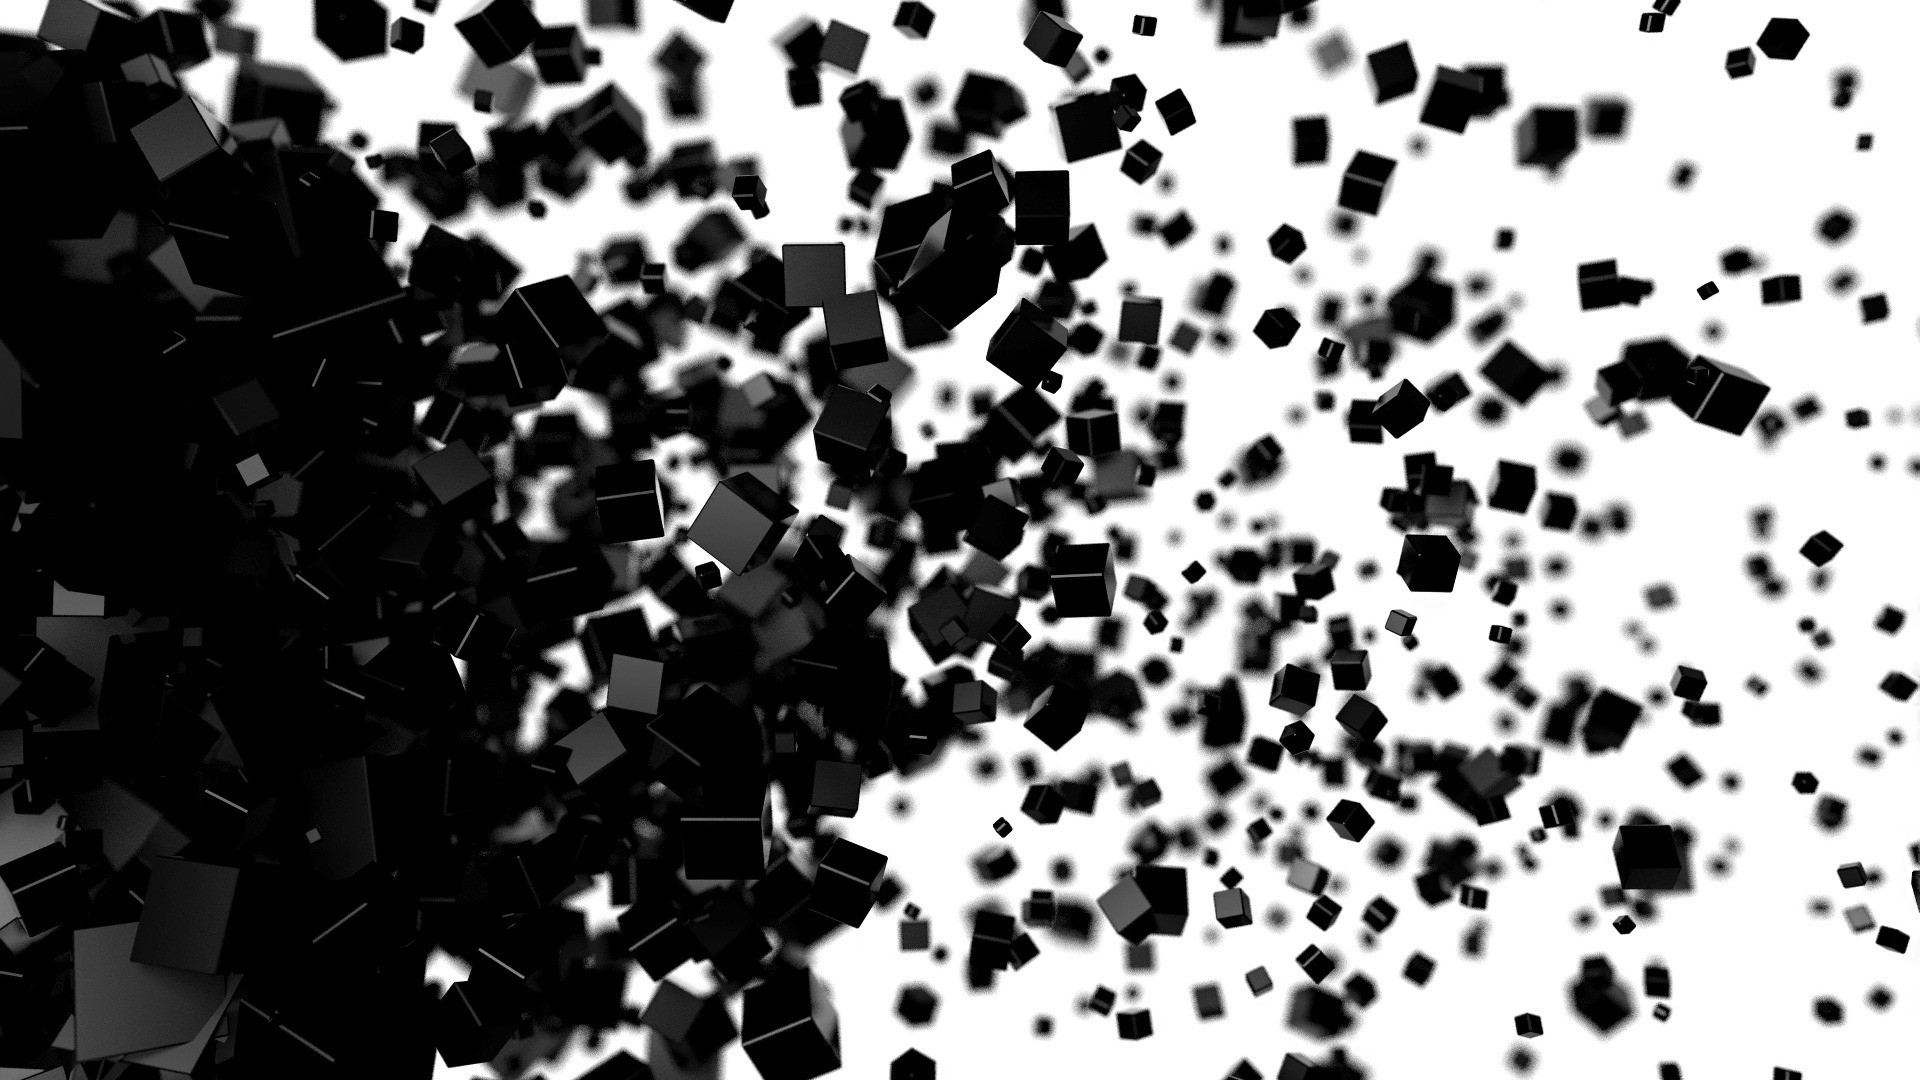 1920x1080 Black and White Abstract Wallpaper